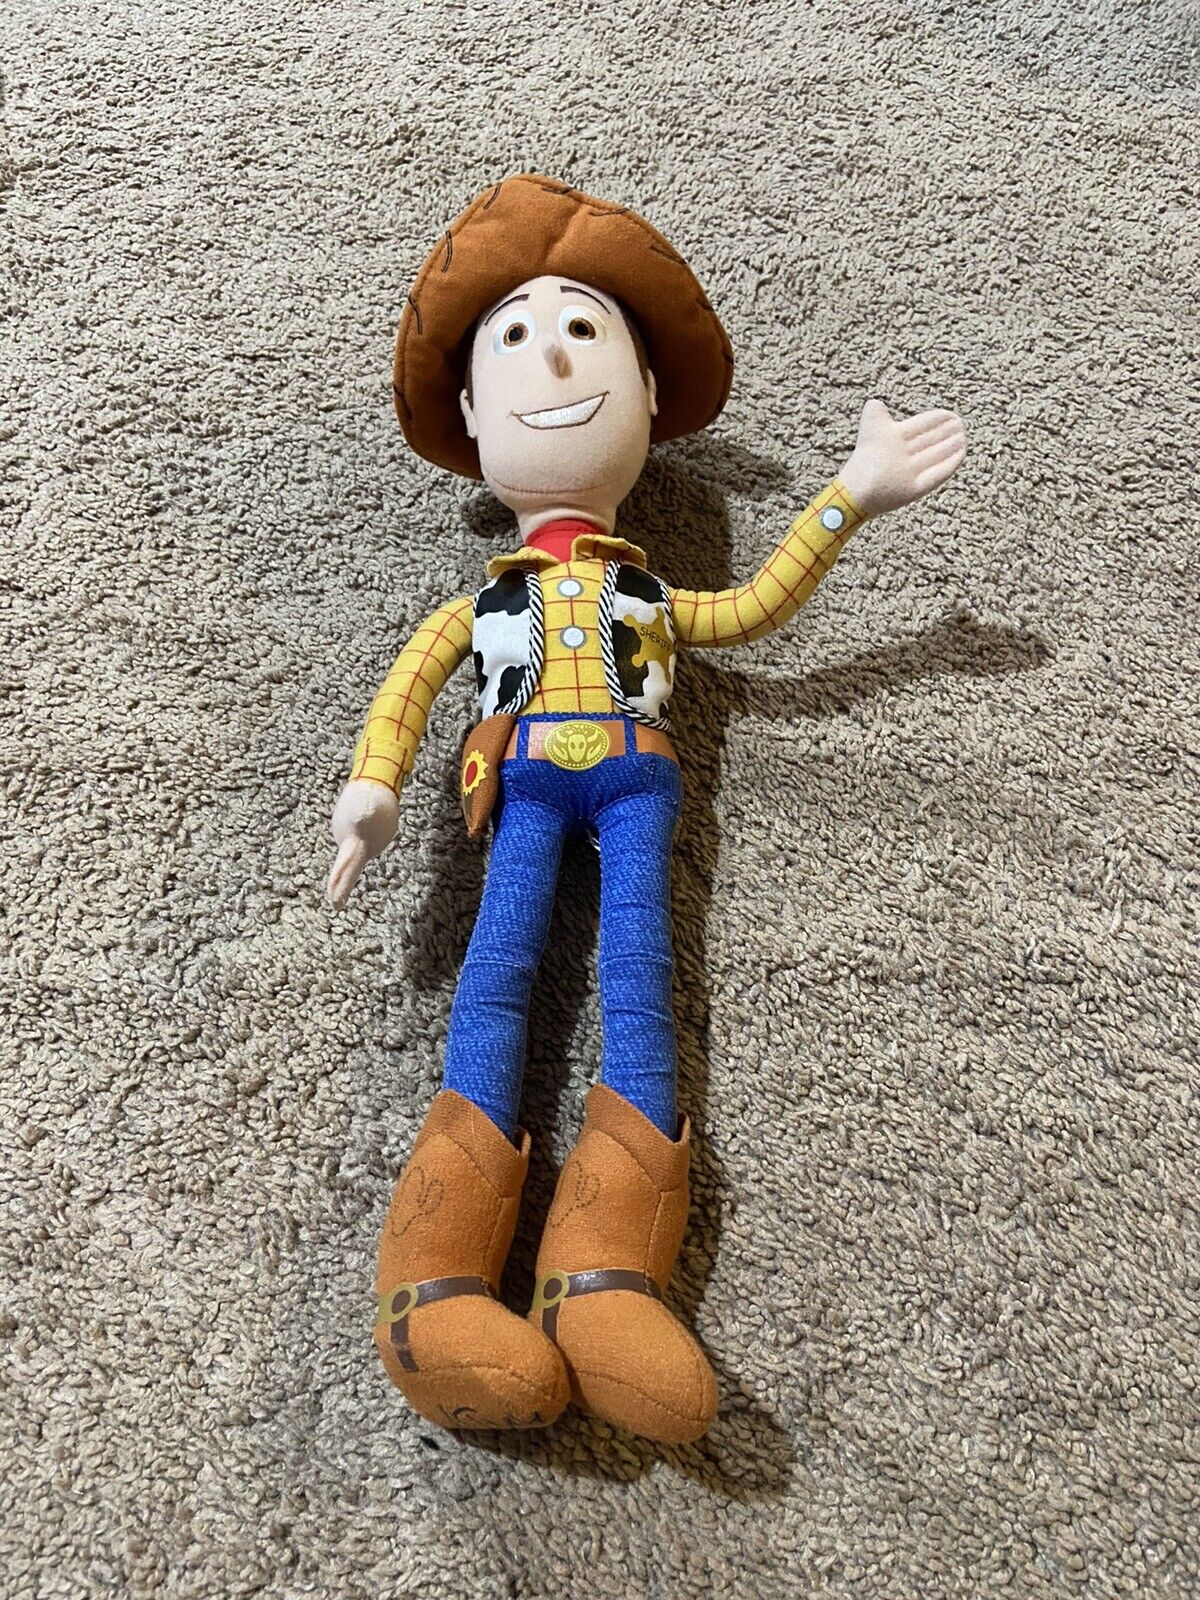 Disney Pixar Toy Story Woody Doll Plush Bendable Poseable Arms Legs 16" HTF